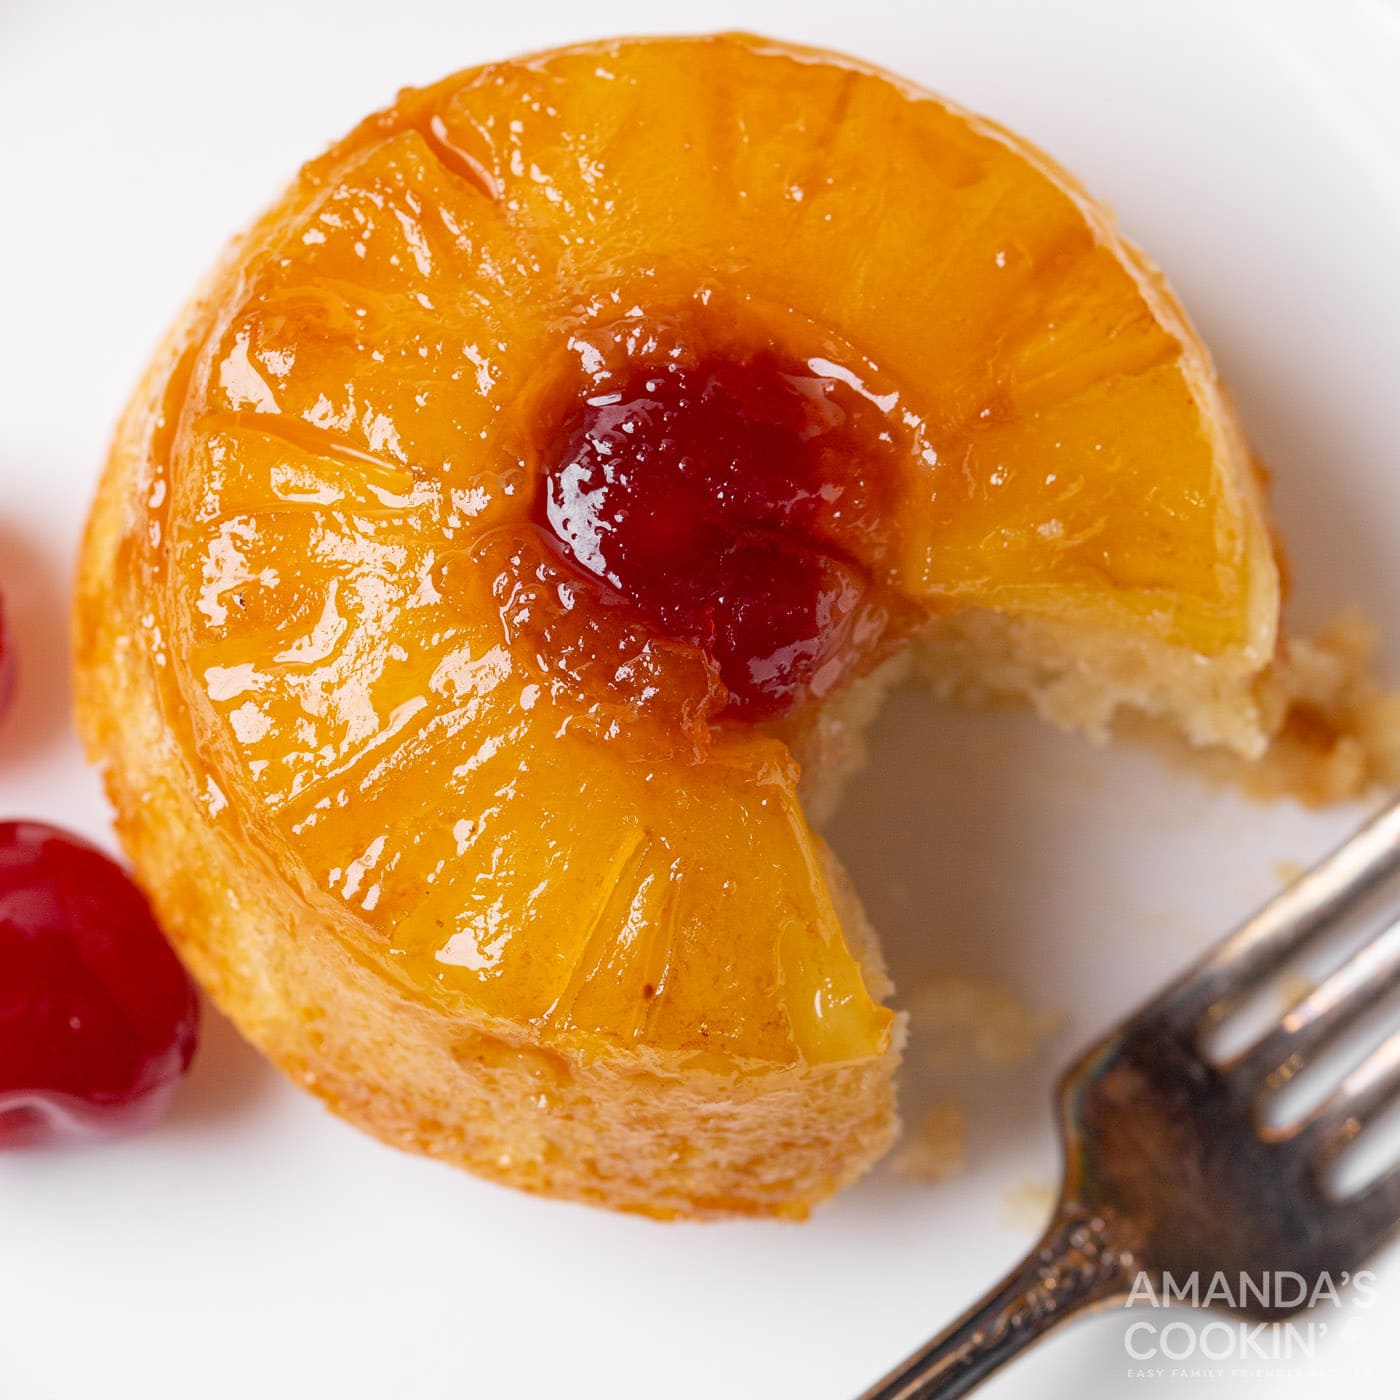 Pineapple Upside Down Cake Without Brown Sugar - Foods Guy